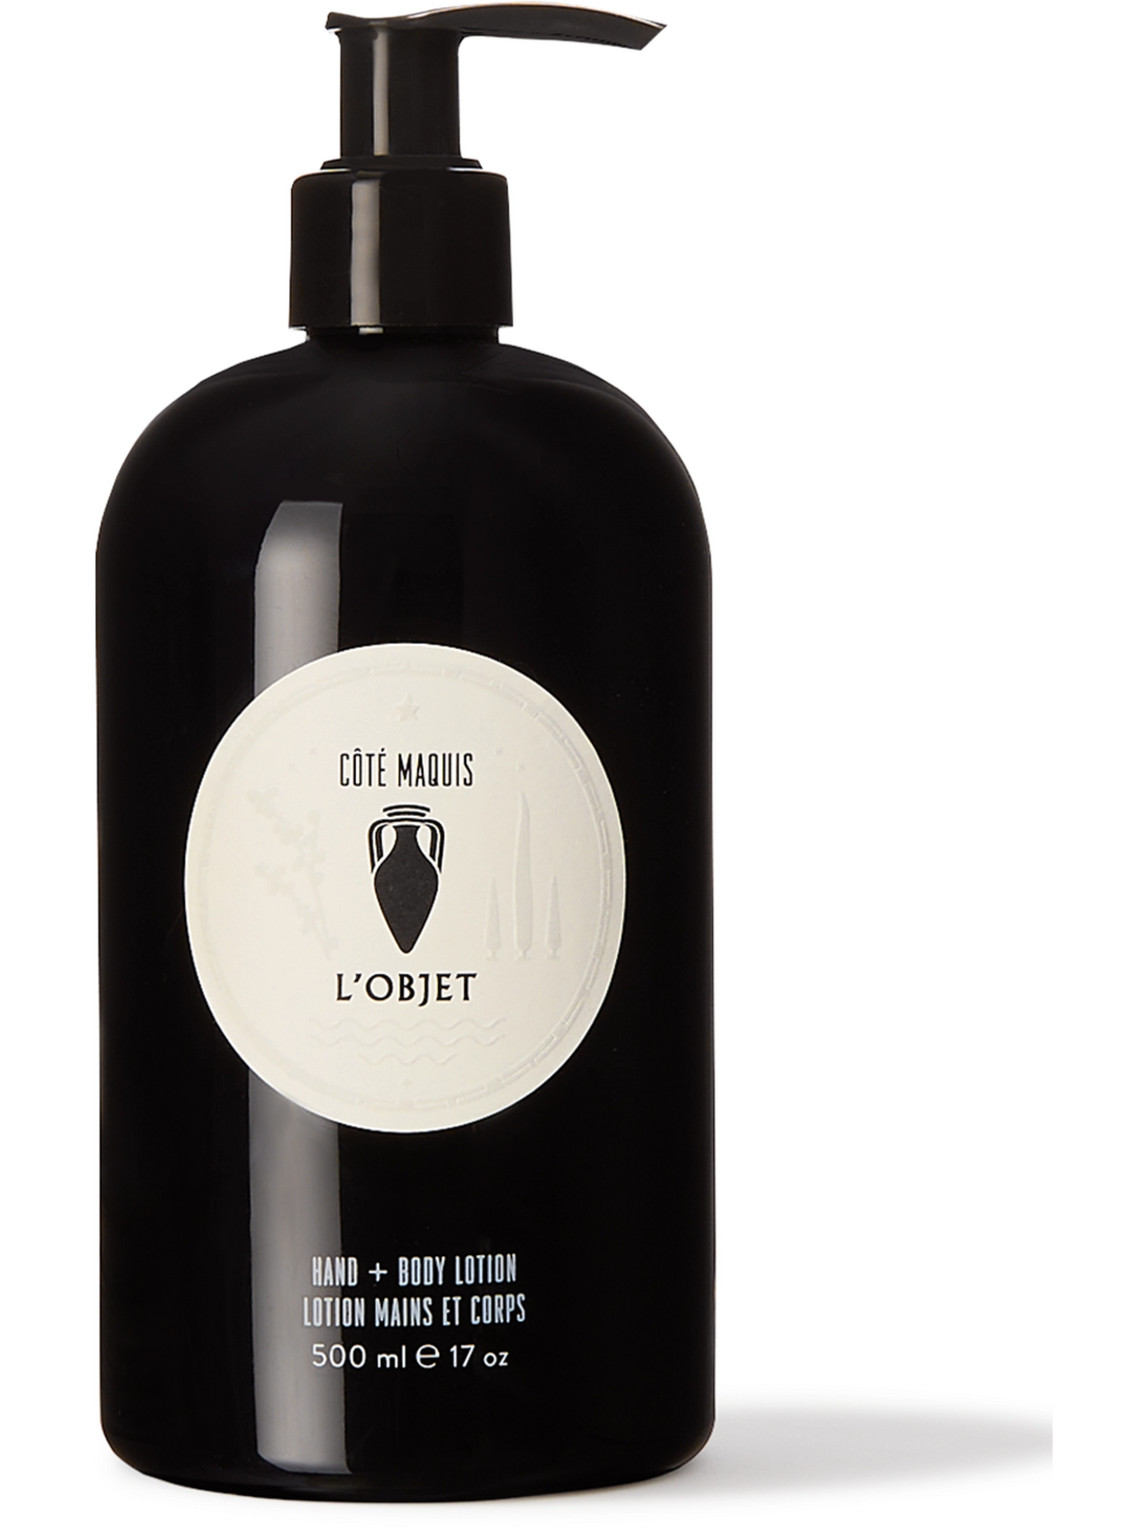 Côté Maquis Hand and Body Lotion, 500ml